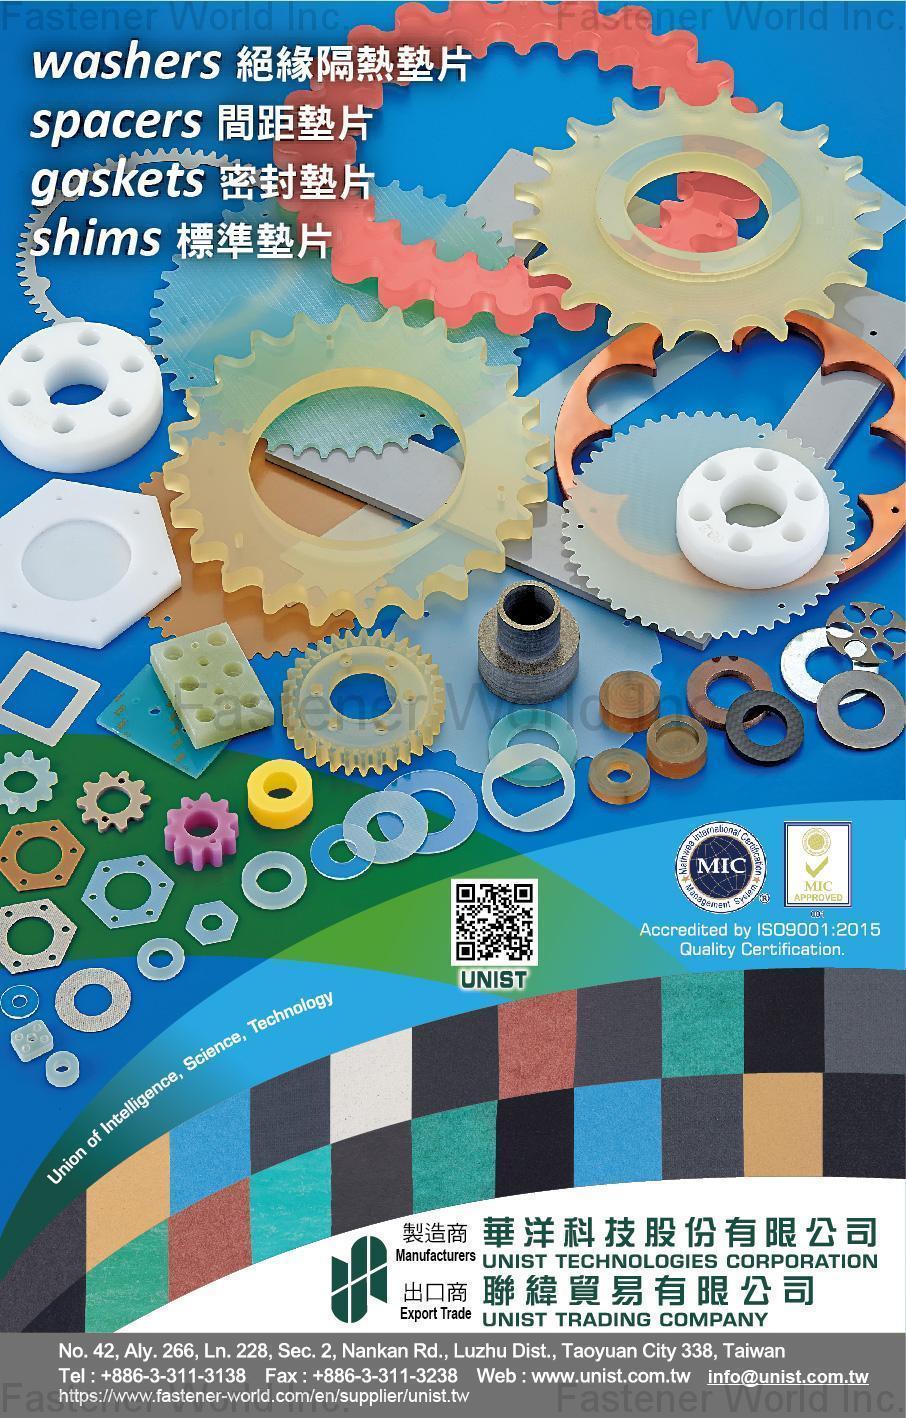 UNIST TECHNOLOGIES CORPORATION , Washers, Spacers, Gaskets, Shims